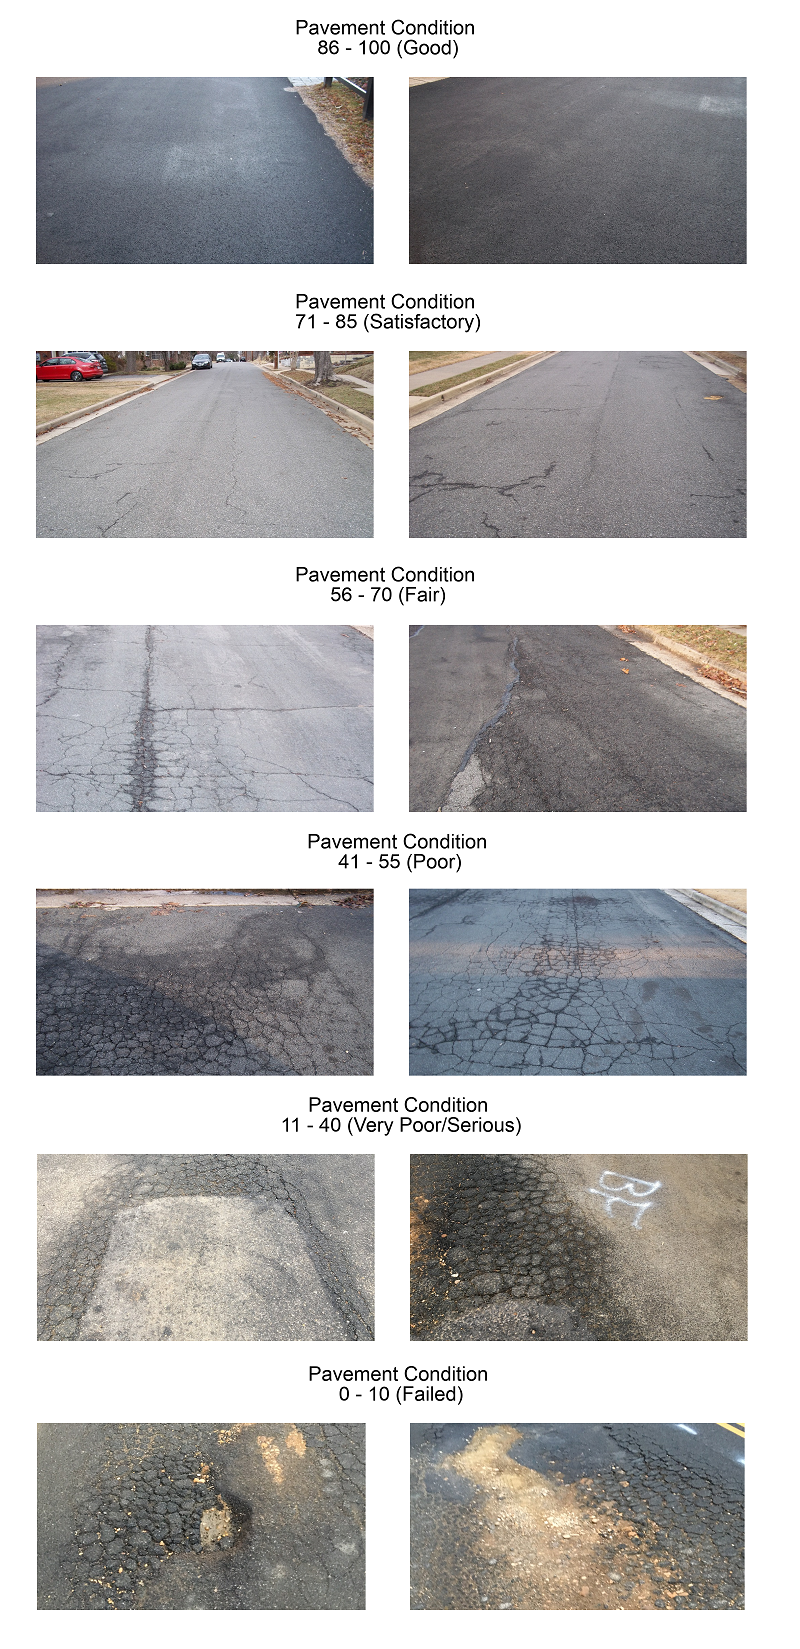 12 showing the various stages of pavement condition, from new to failed/crumbling 